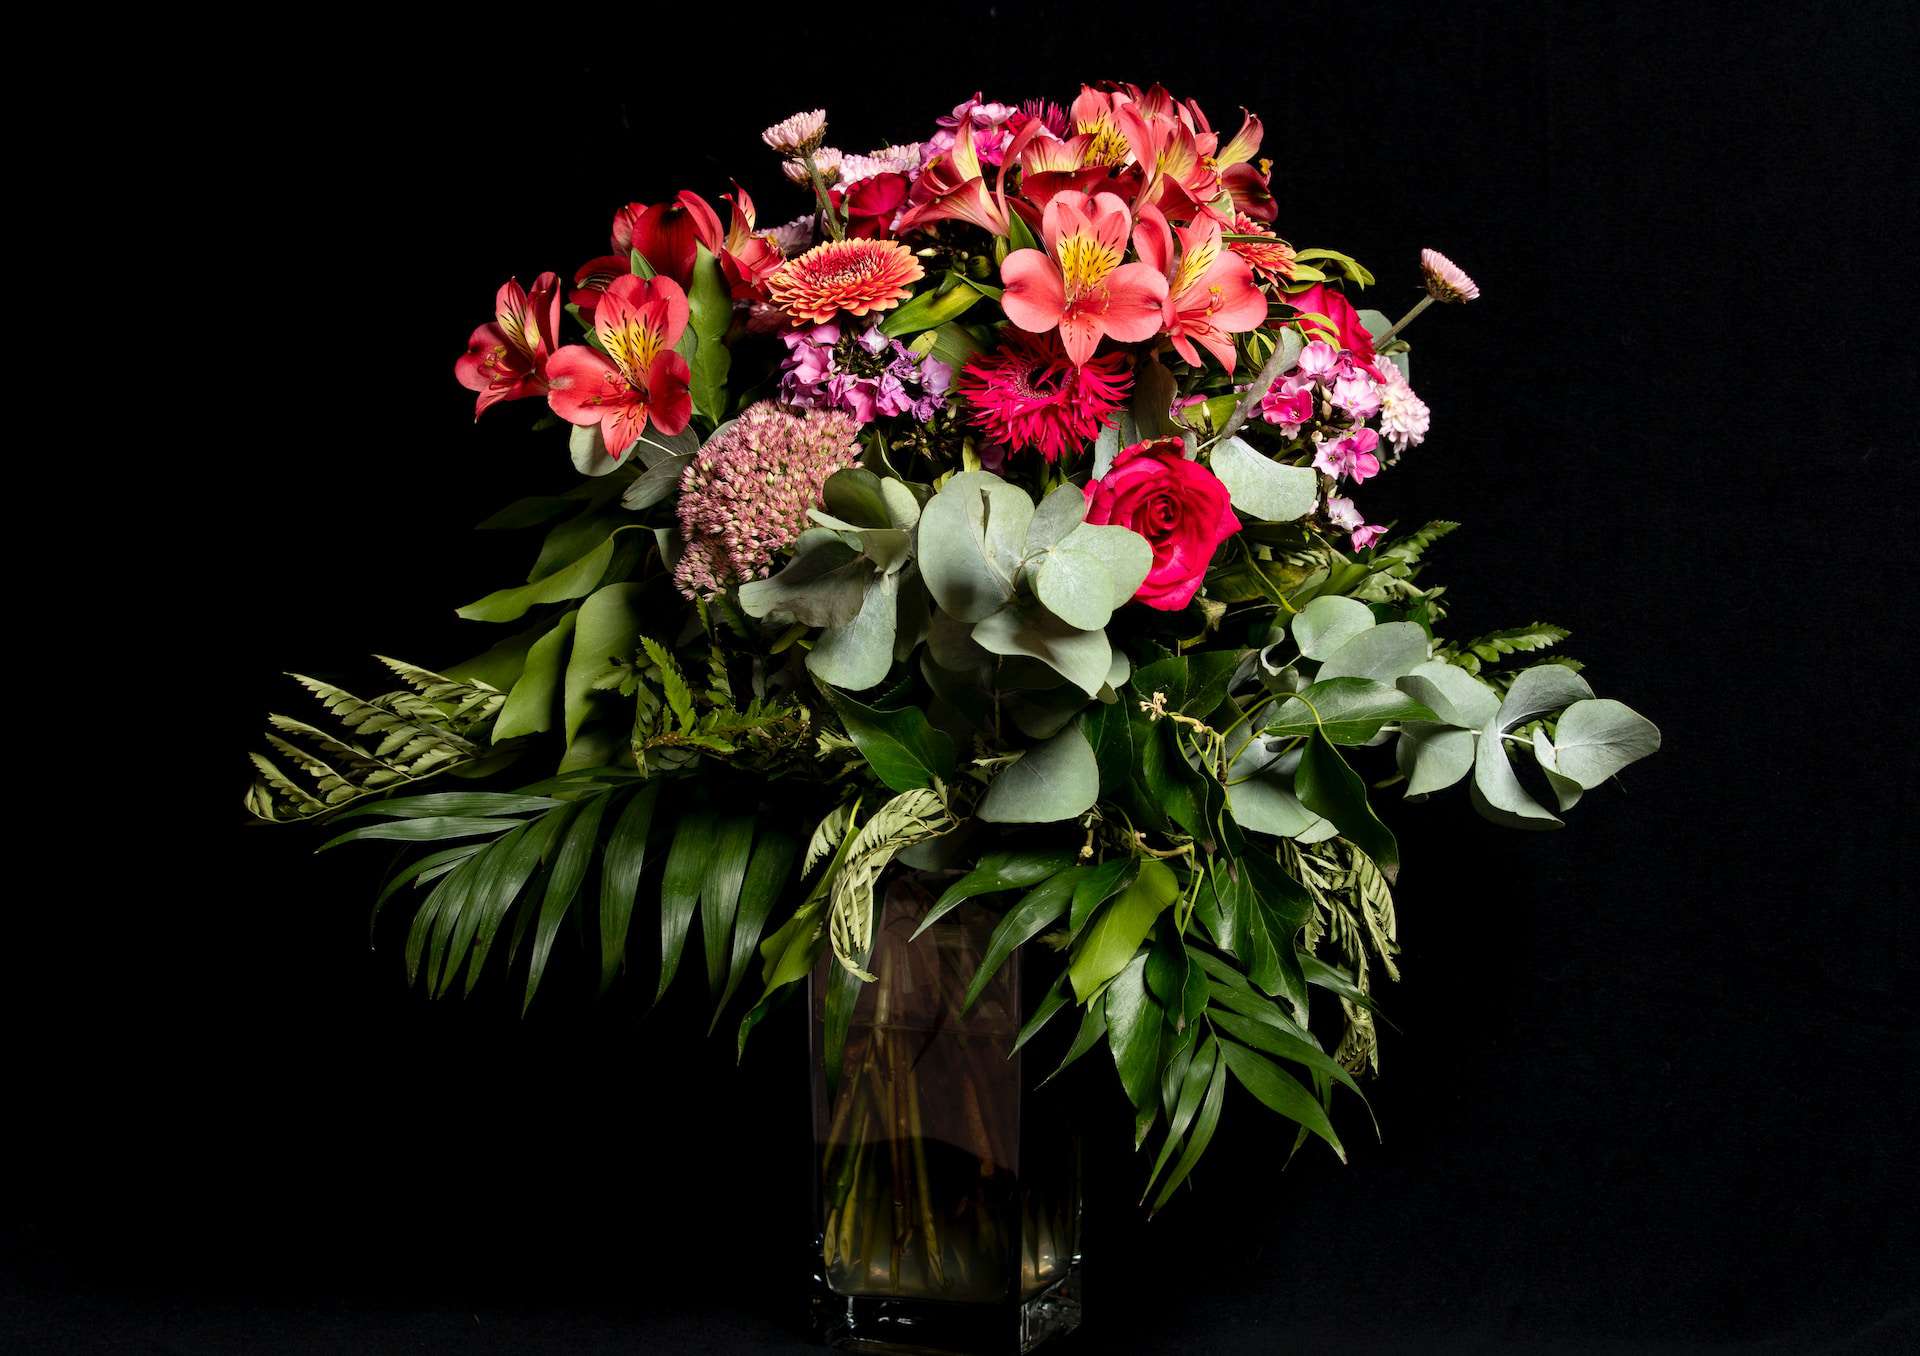 Bouquet of red flowers in vase on table with black background